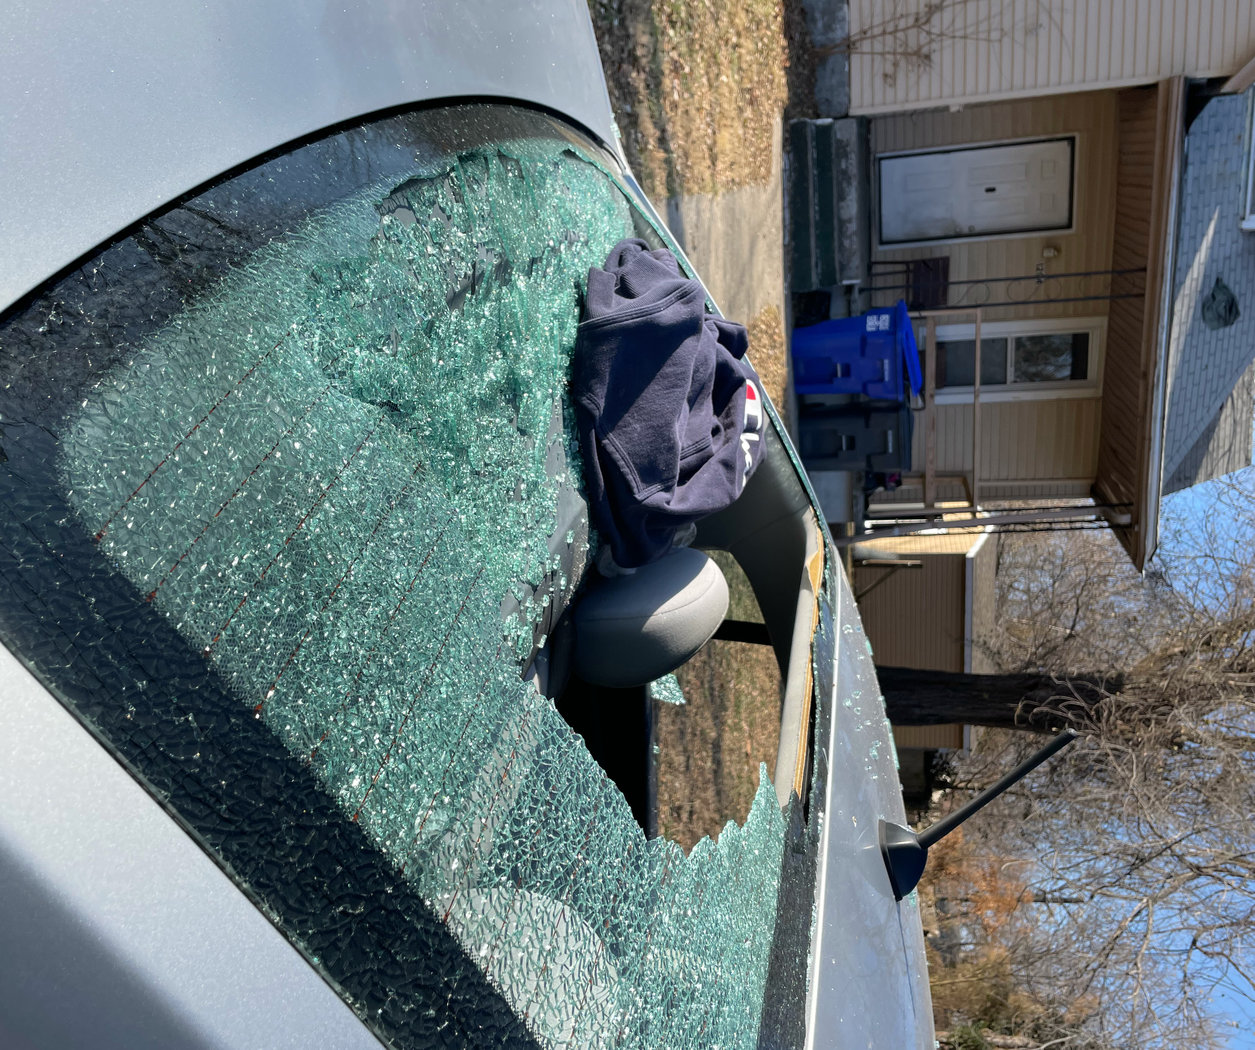 Damage to a car’s window in front of the home was reported to the Sedalia Police Department at 2:27 a.m. Monday. Police say the vandalism and shooting are currently under investigation.